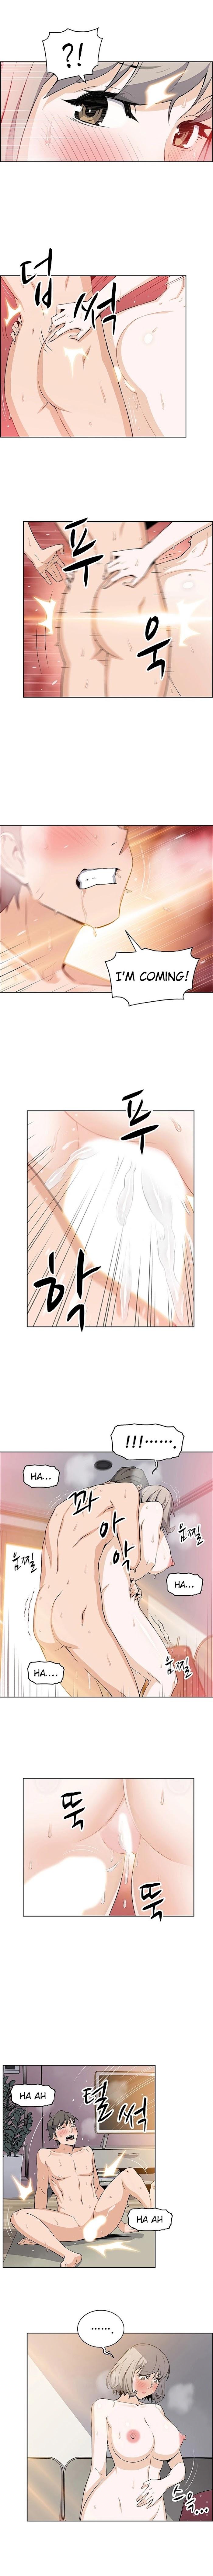 Housekeeper [Neck Pillow, Paper] Ch.49/49 [English] [Manhwa PDF] Completed 199